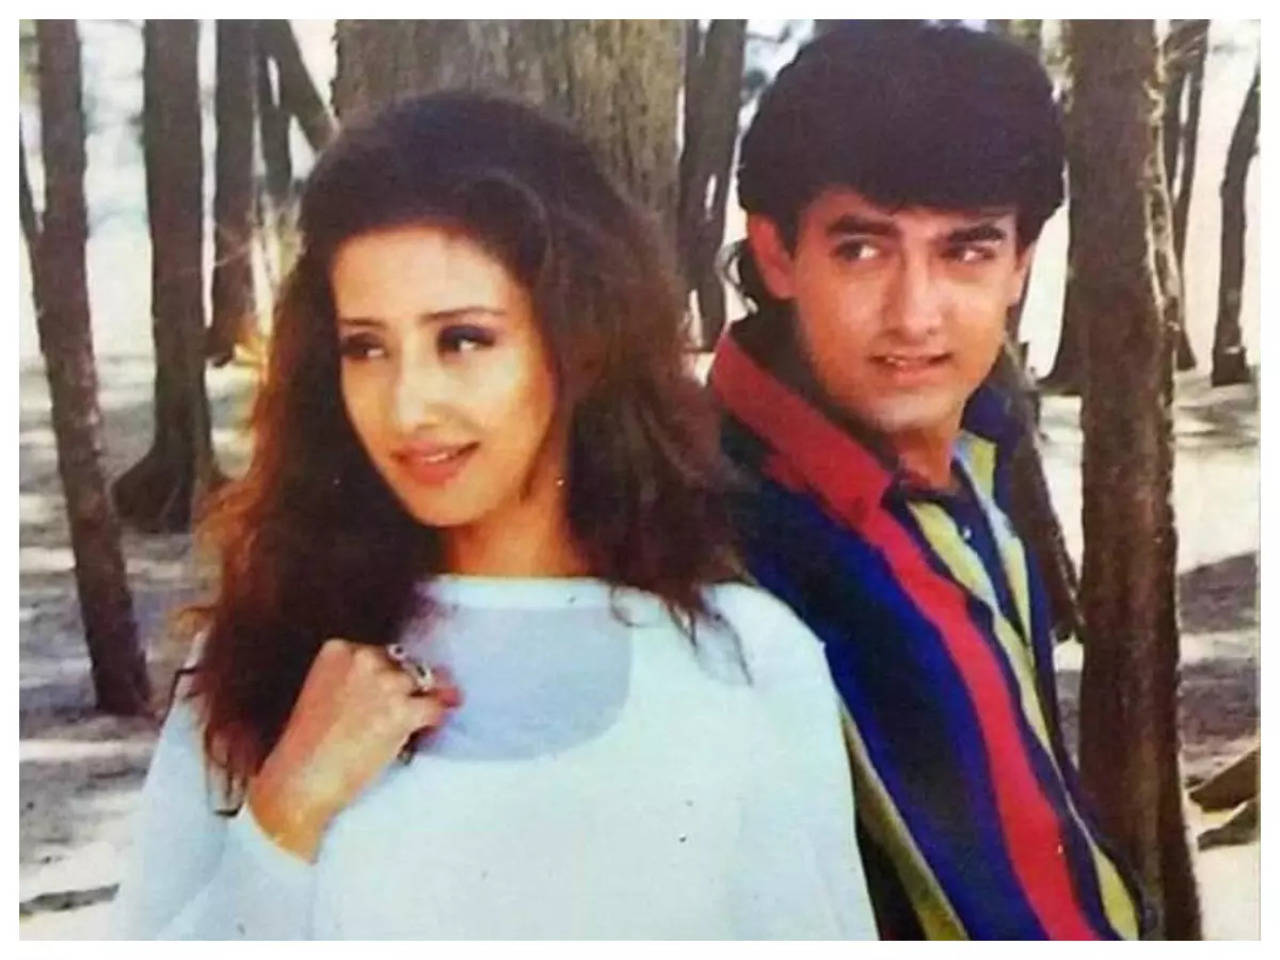 Did you know Manisha Koirala got angry at Aamir Khan for being unfriendly on the sets of Akele Hum Akele Tum? Hindi Movie News pic